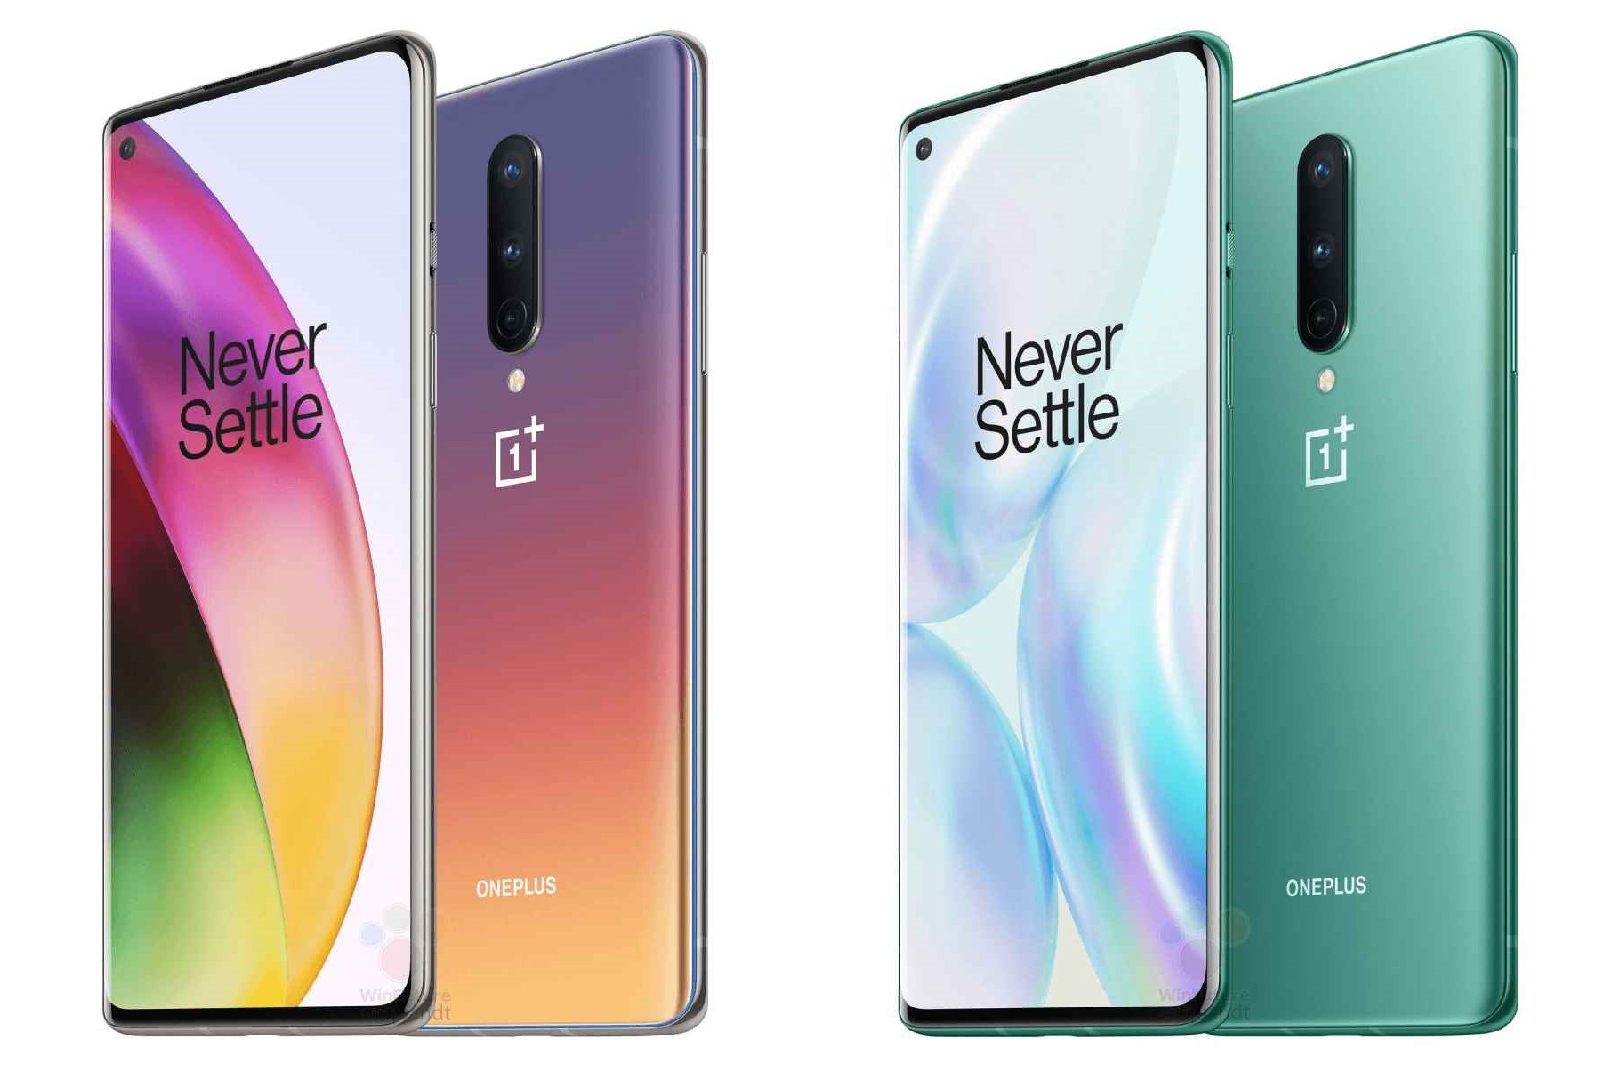 Check out the cheaper OnePlus 8 5G in all official colors